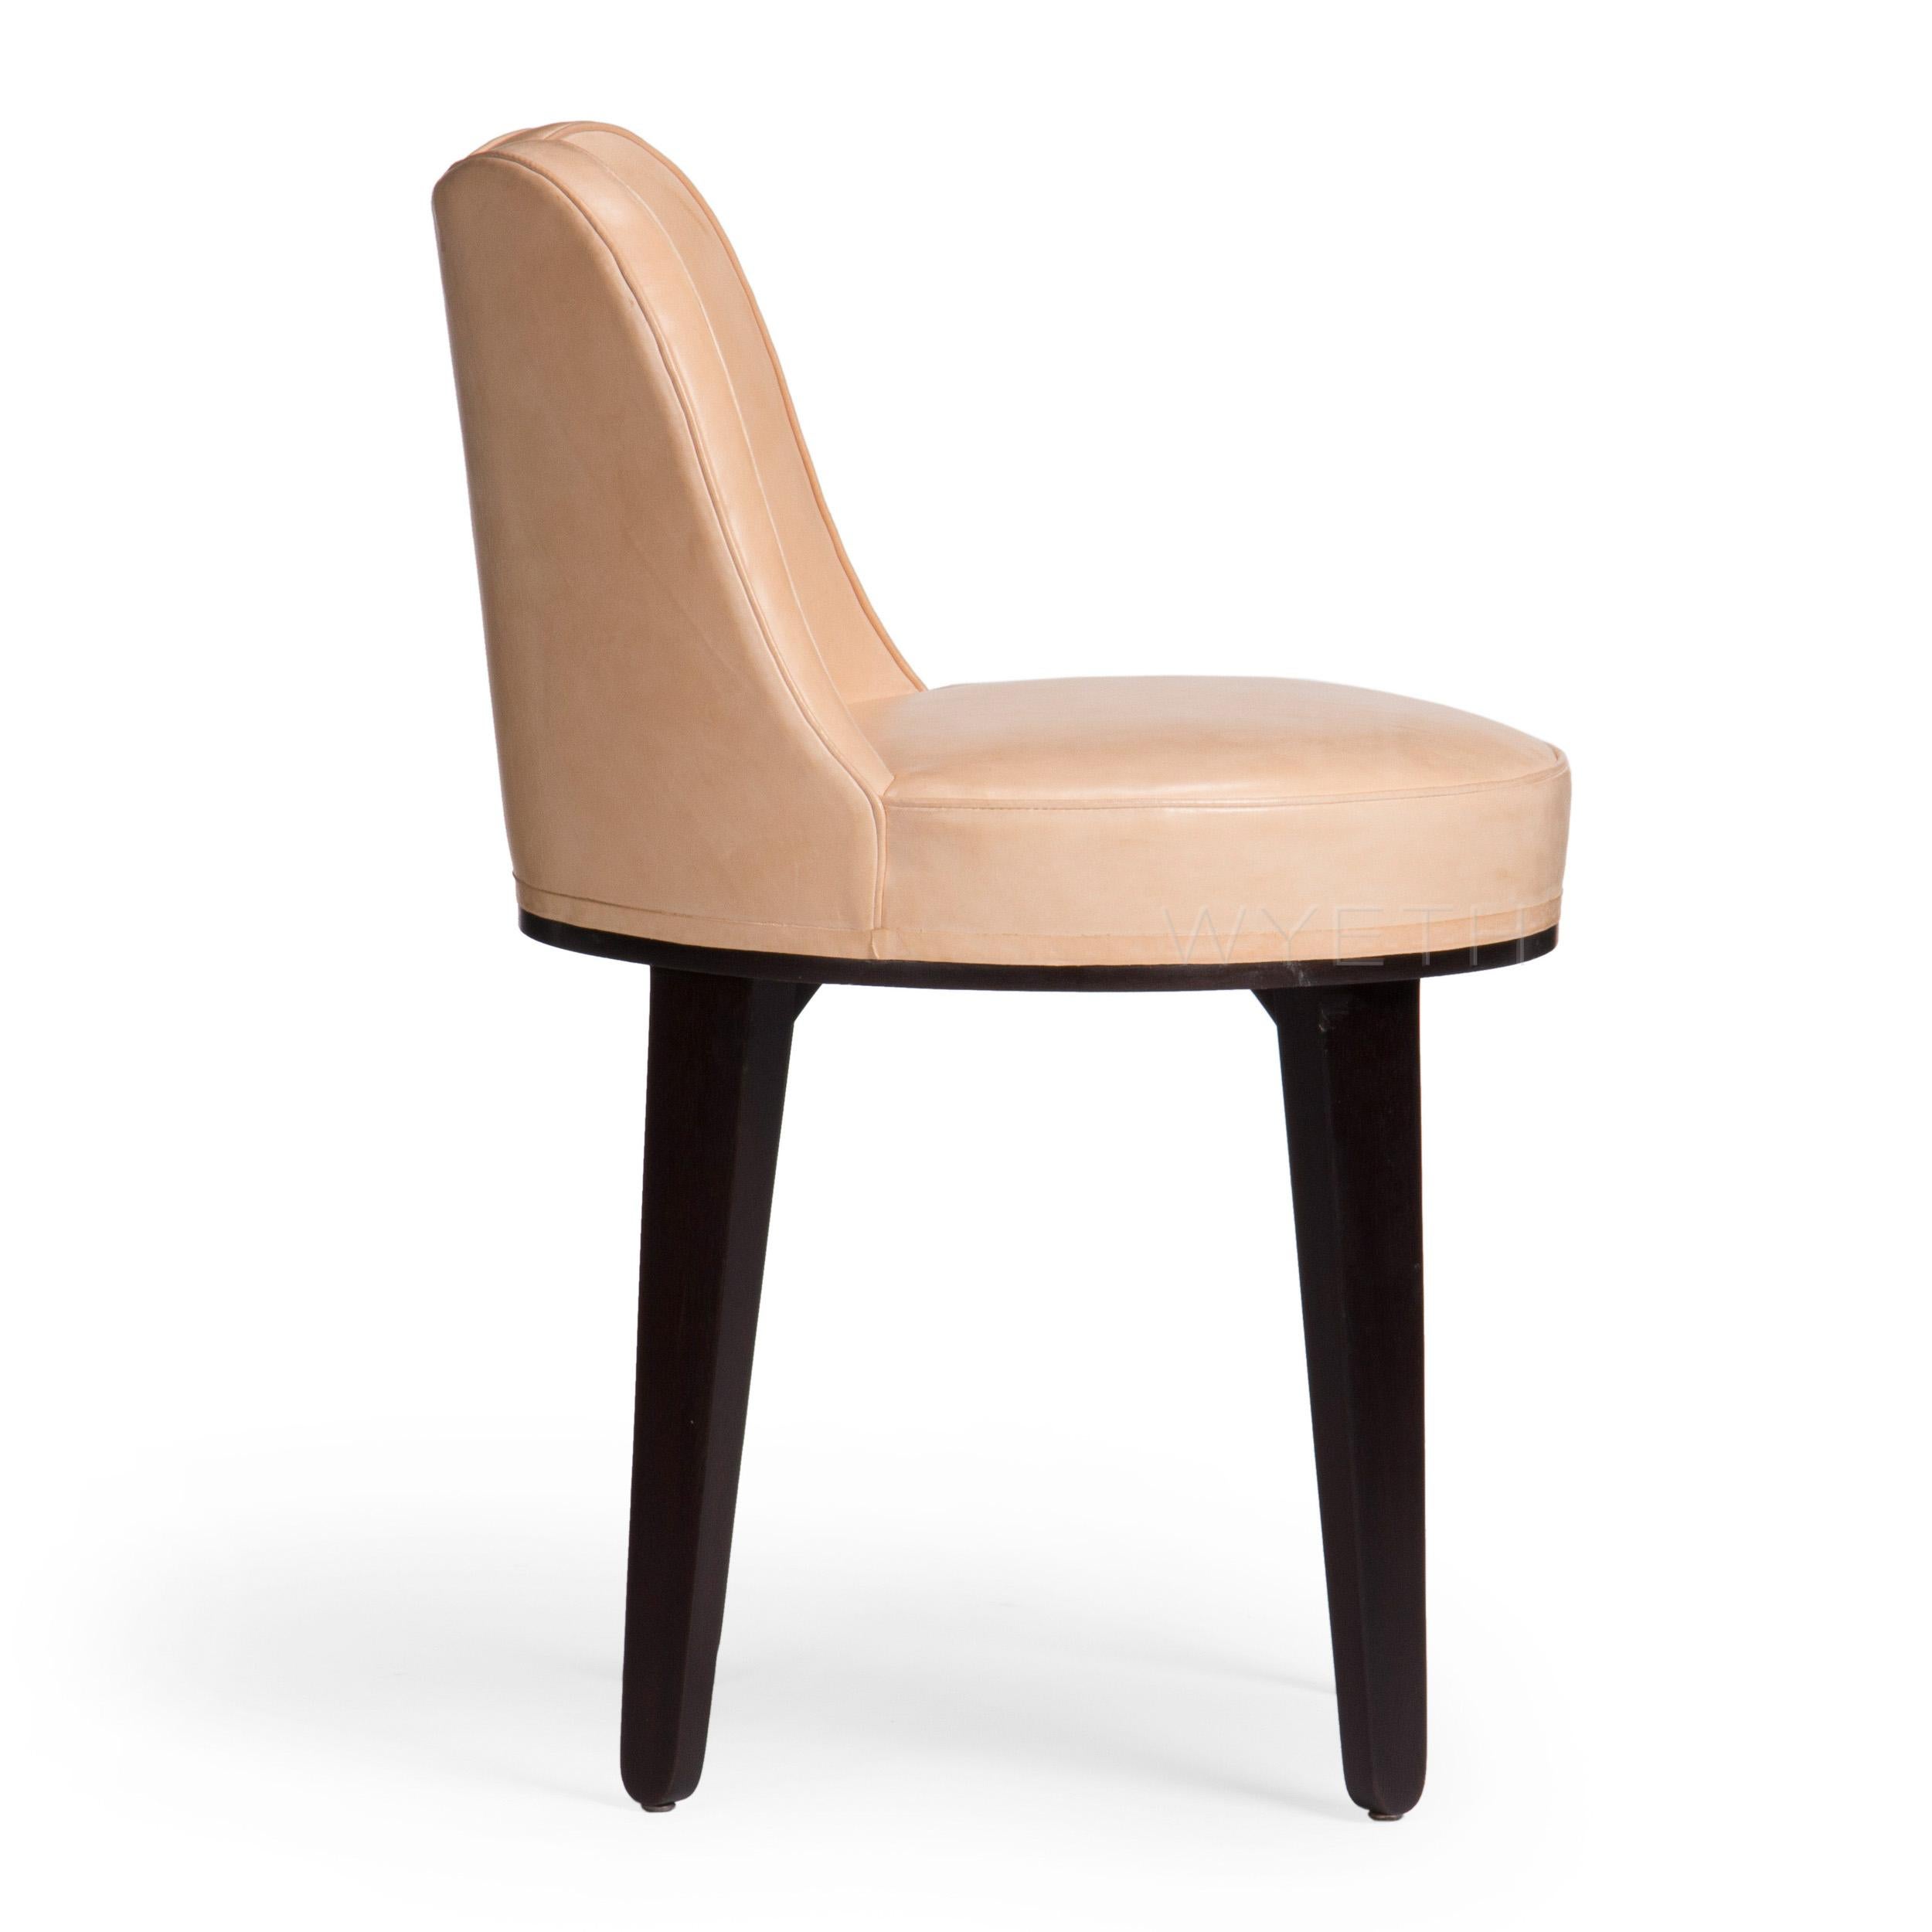 A small sway backed swivel chair with hairpin, ebonized mahogany legs. Newly upholstered in natural waxed leather.